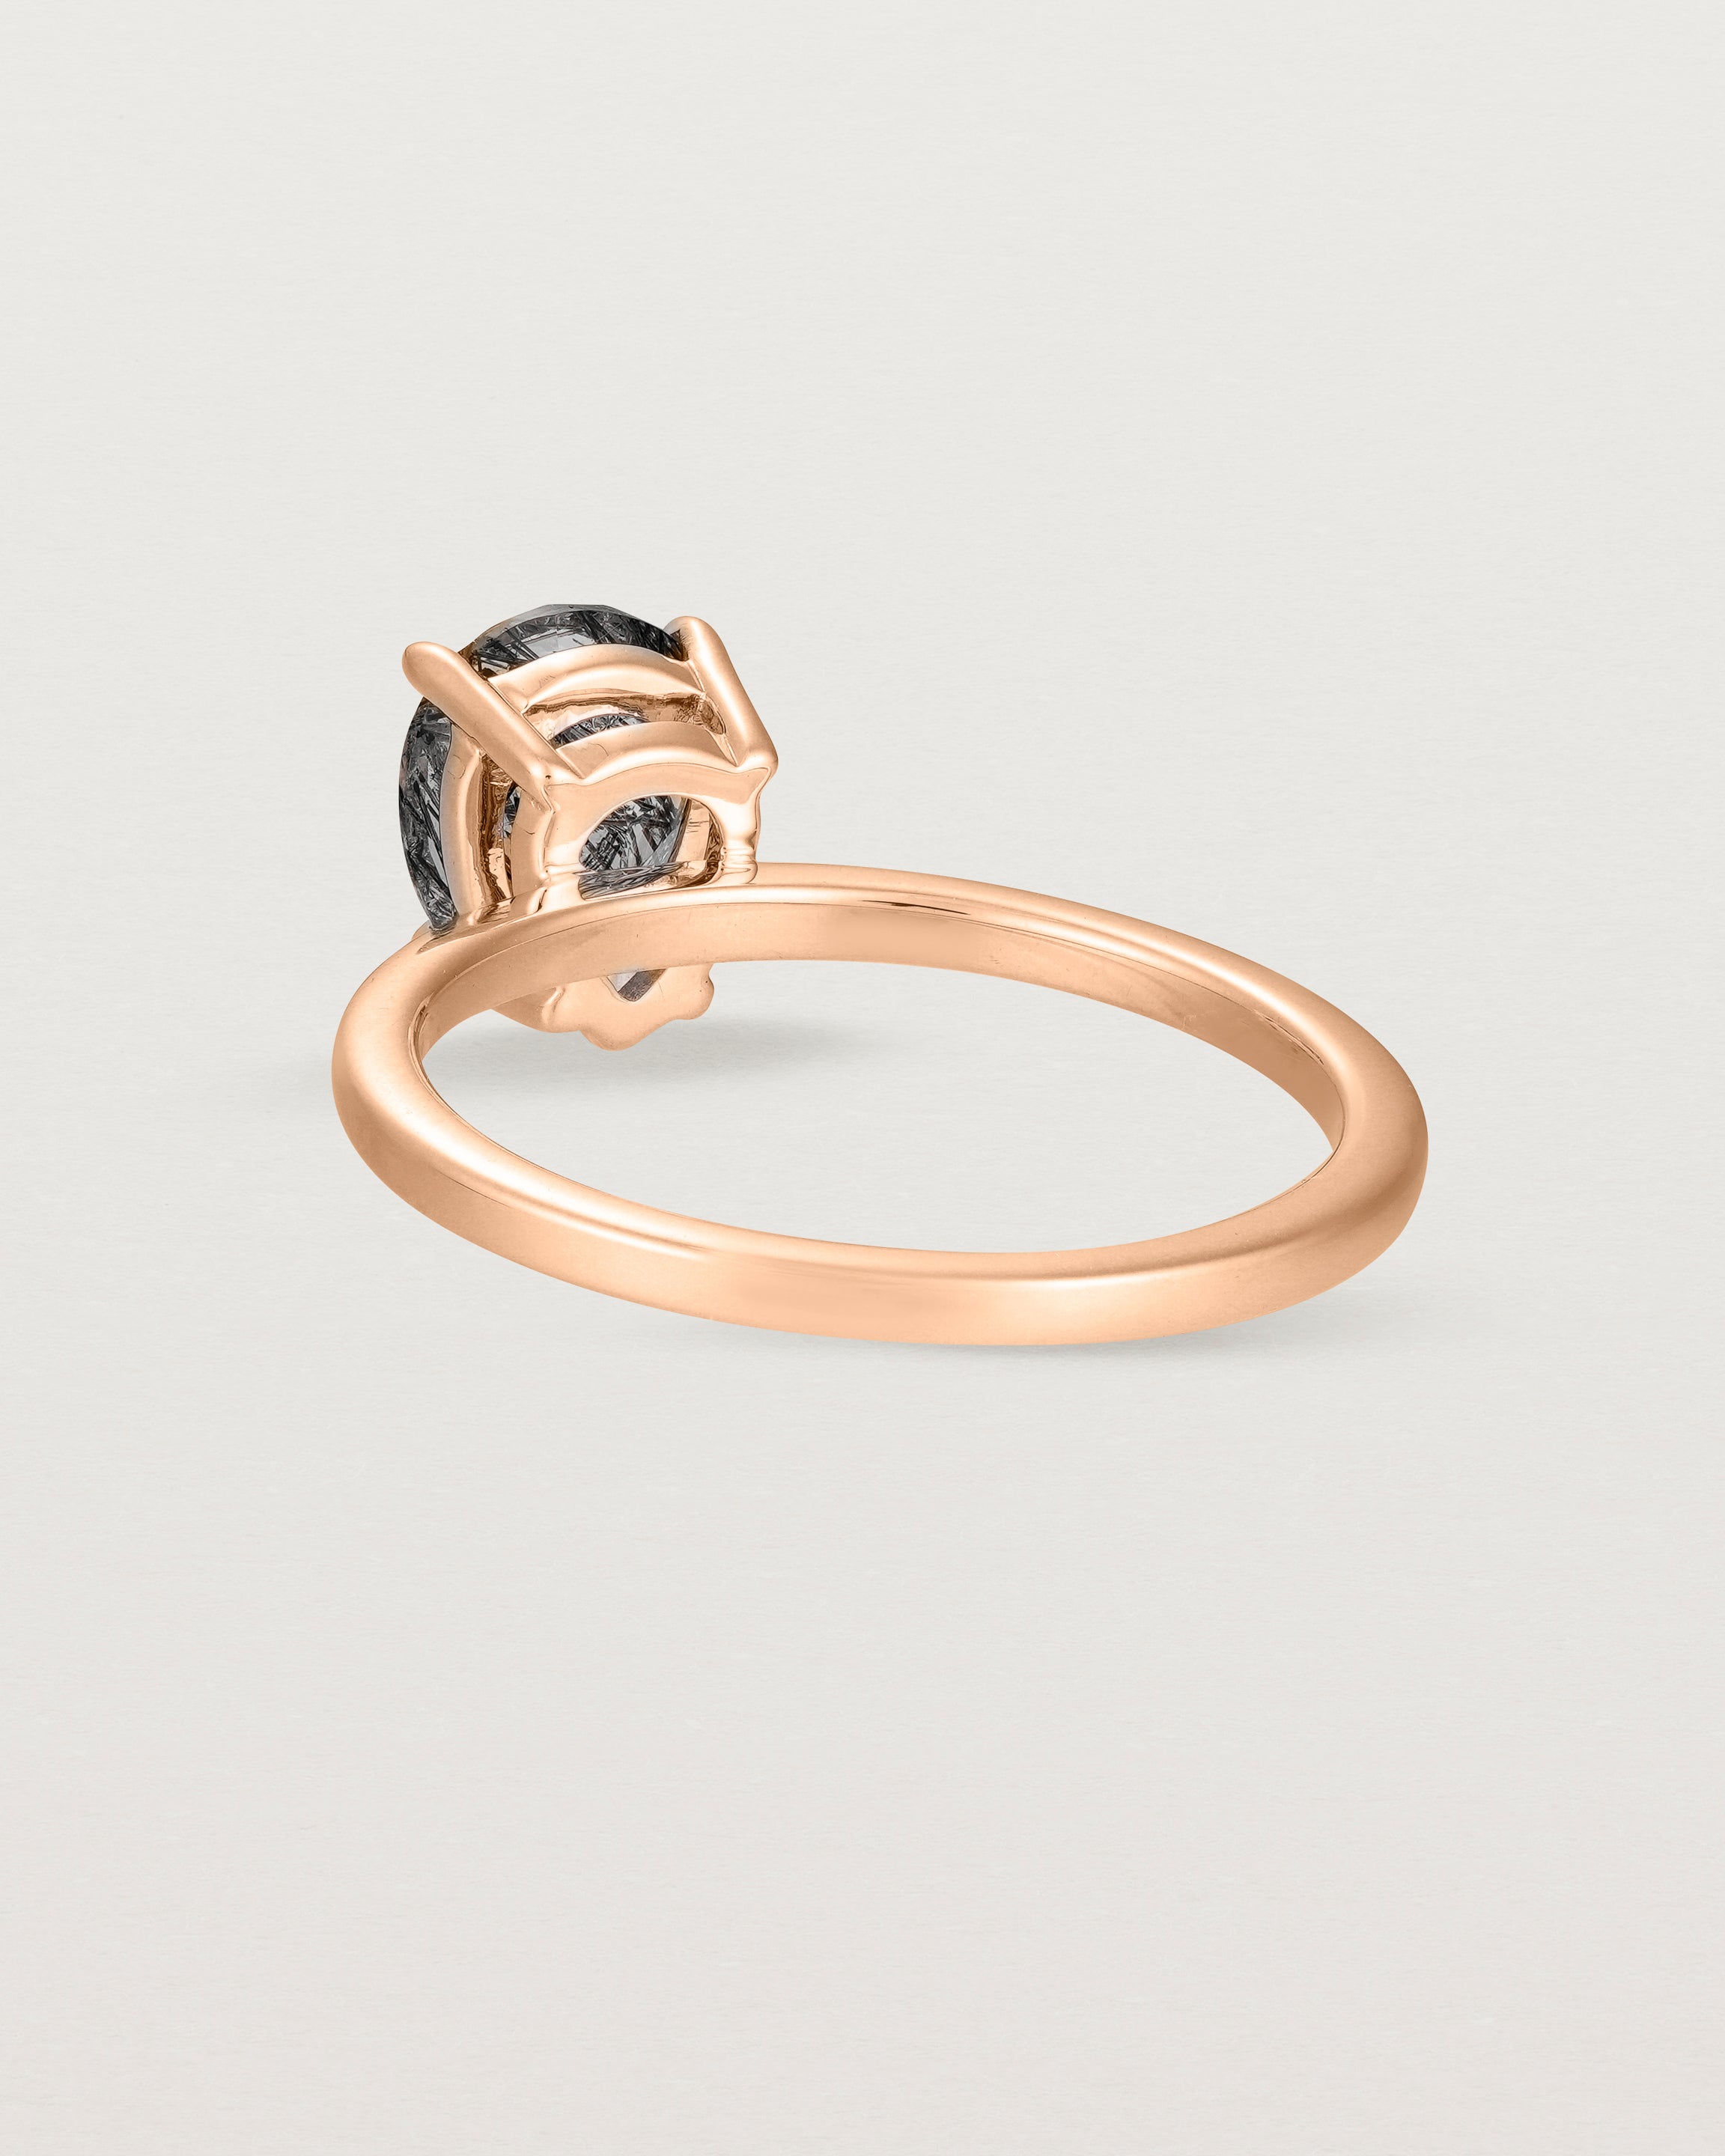 Back view of the Una Pear Solitaire | Tourmalinated Quartz | Rose Gold.